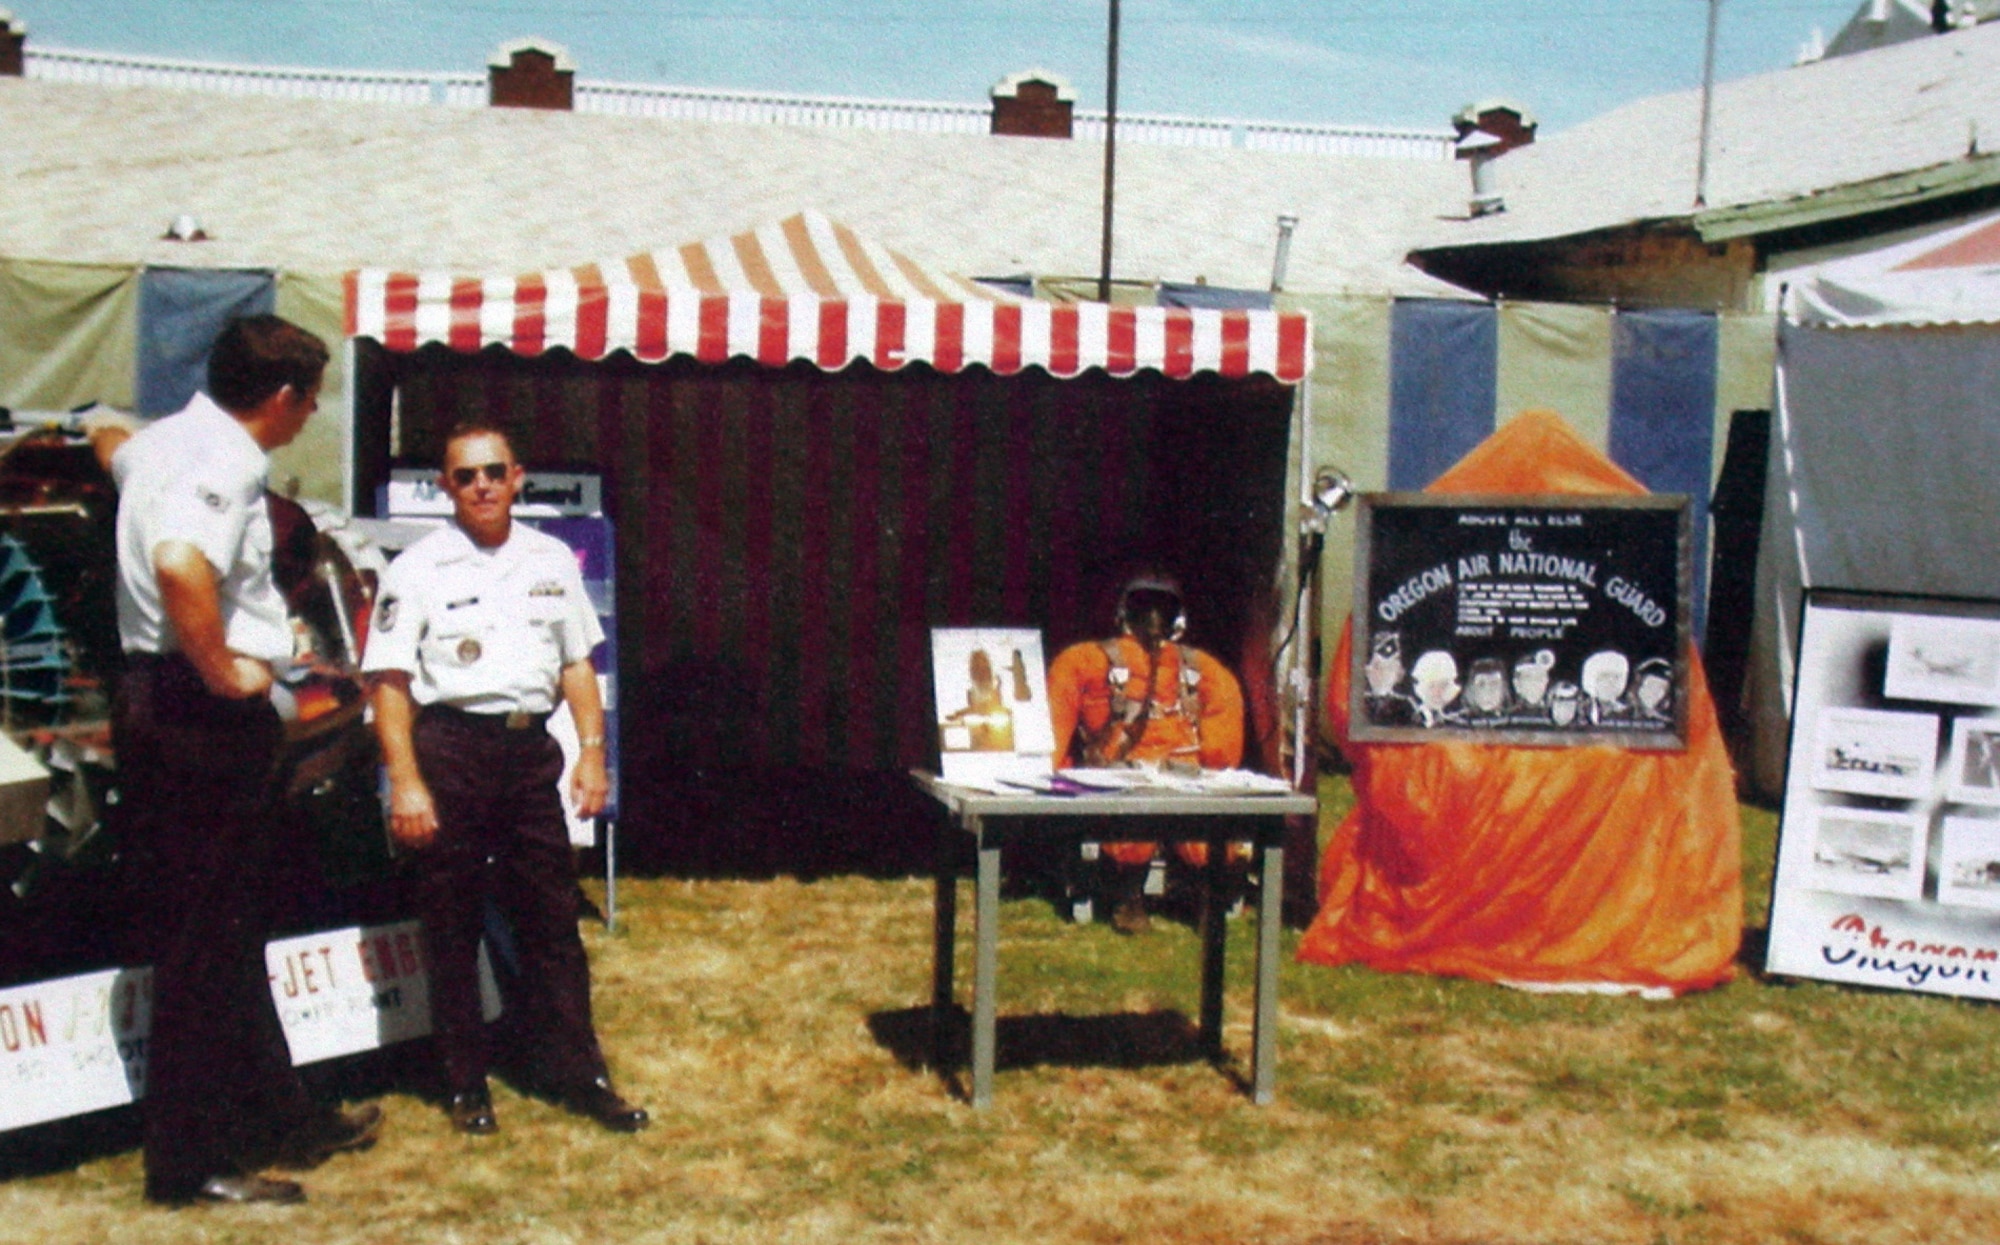 SMSgt Gene Thomas (right), OreANG Recruiter, speaks with an unidentified airman at the OreANG Recruiting stand at the State Fair in Salem, Oregon, in the summer of 1974.